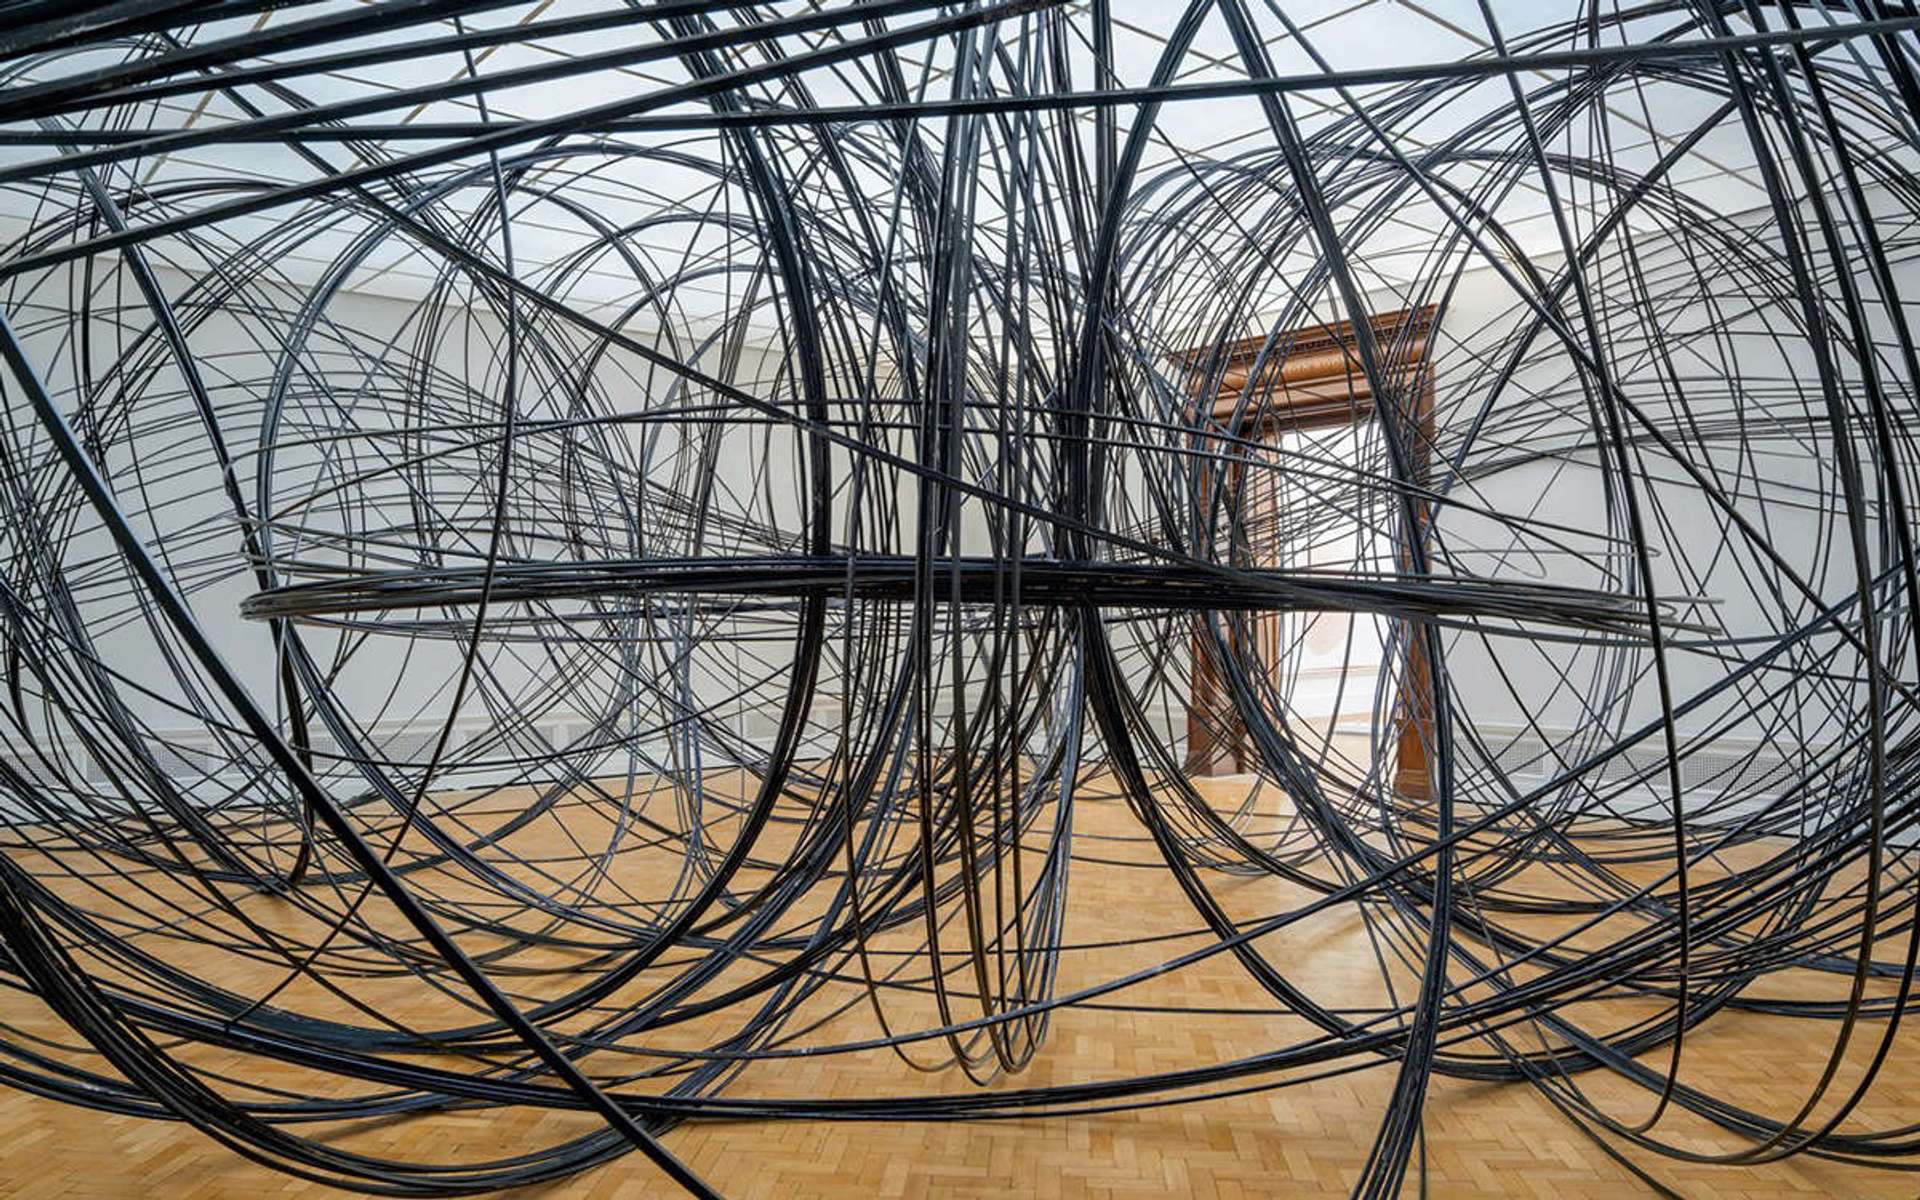 An image of Antony Gormley's installation Clearing VII: A complex arrangement of intertwined metal loops forming a spacious web-like structure that can be traversed by people.